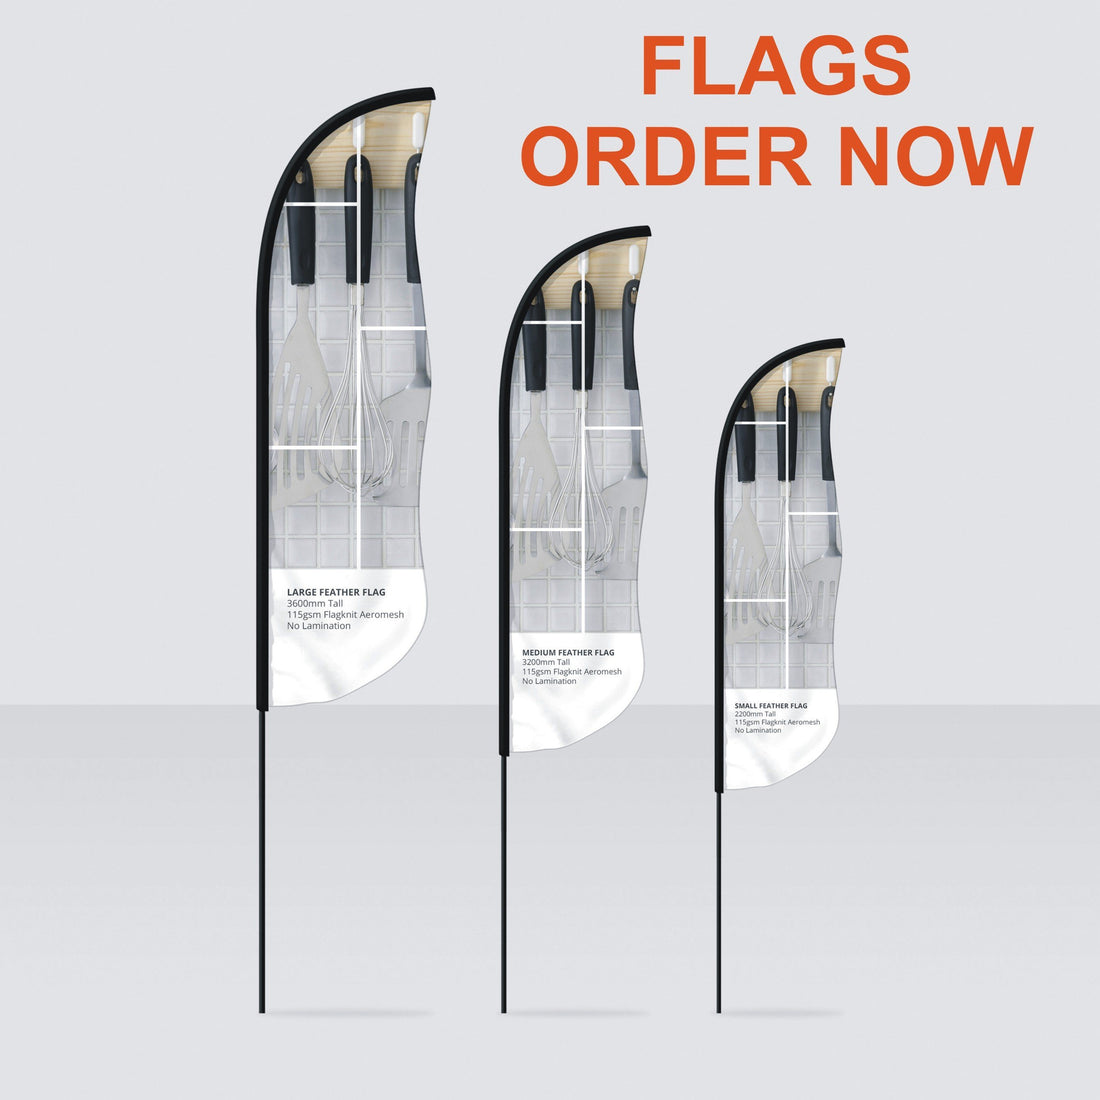 Promotional Flags - Buy Online!